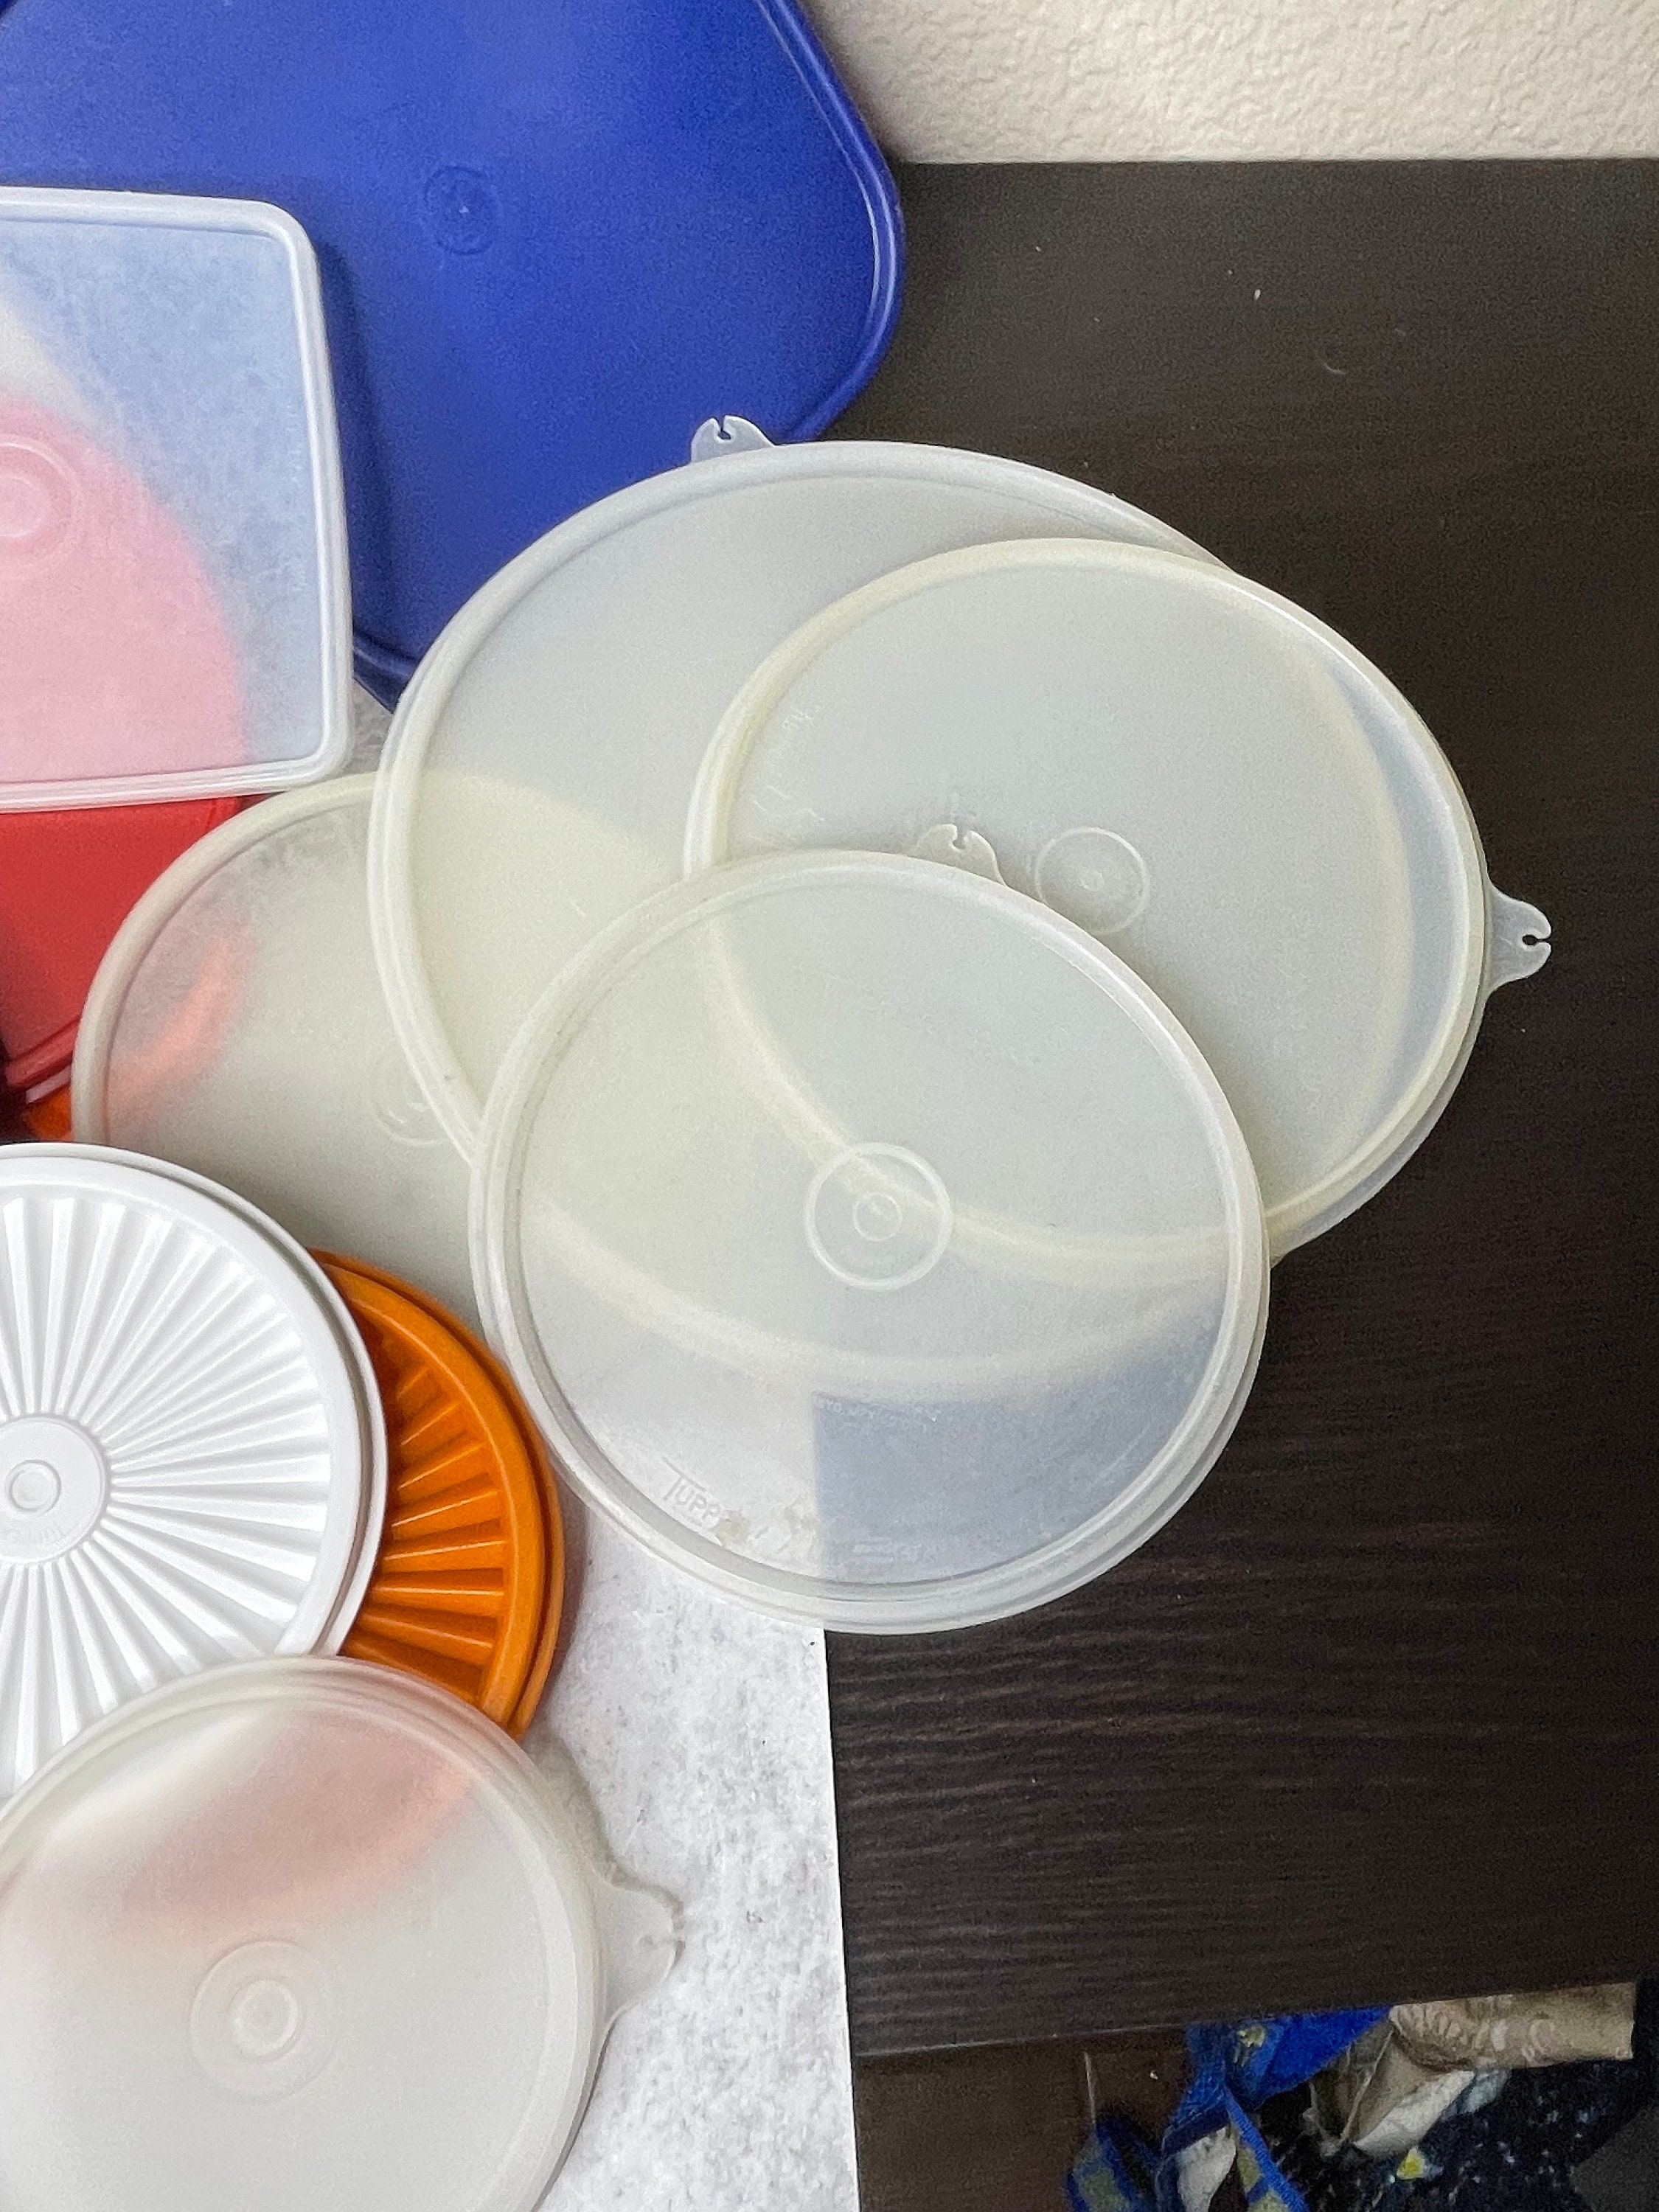 Vintage Tupperware Replacement Lids Choose Your Lid Wide Variety  Ask Me for Help Finding a Lid. READ DESCRIPTION -  Denmark